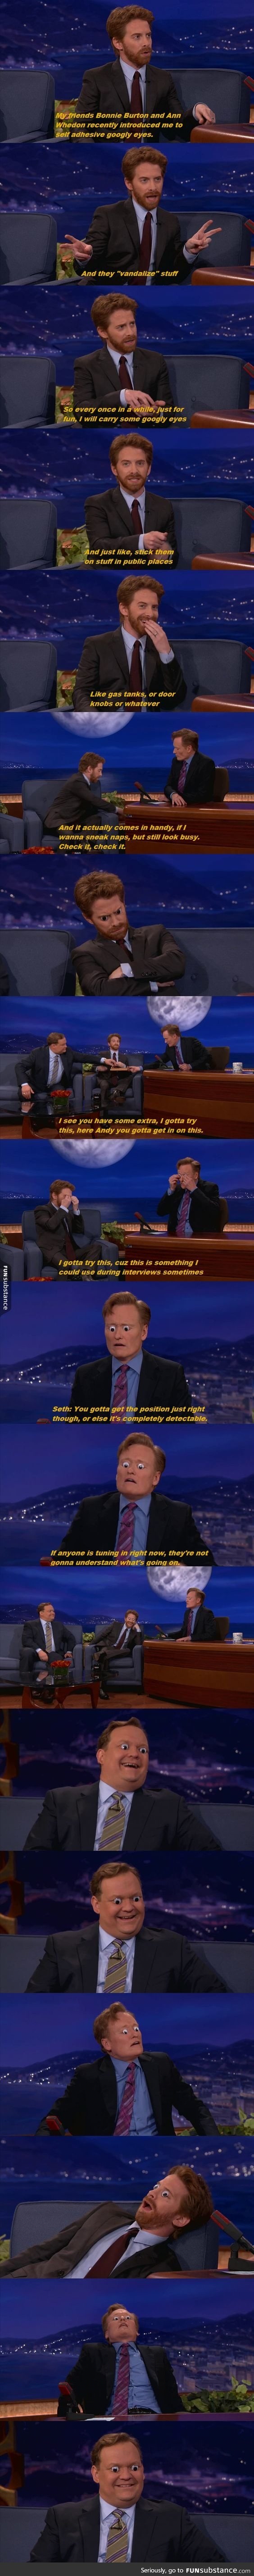 Seth Green is awesome